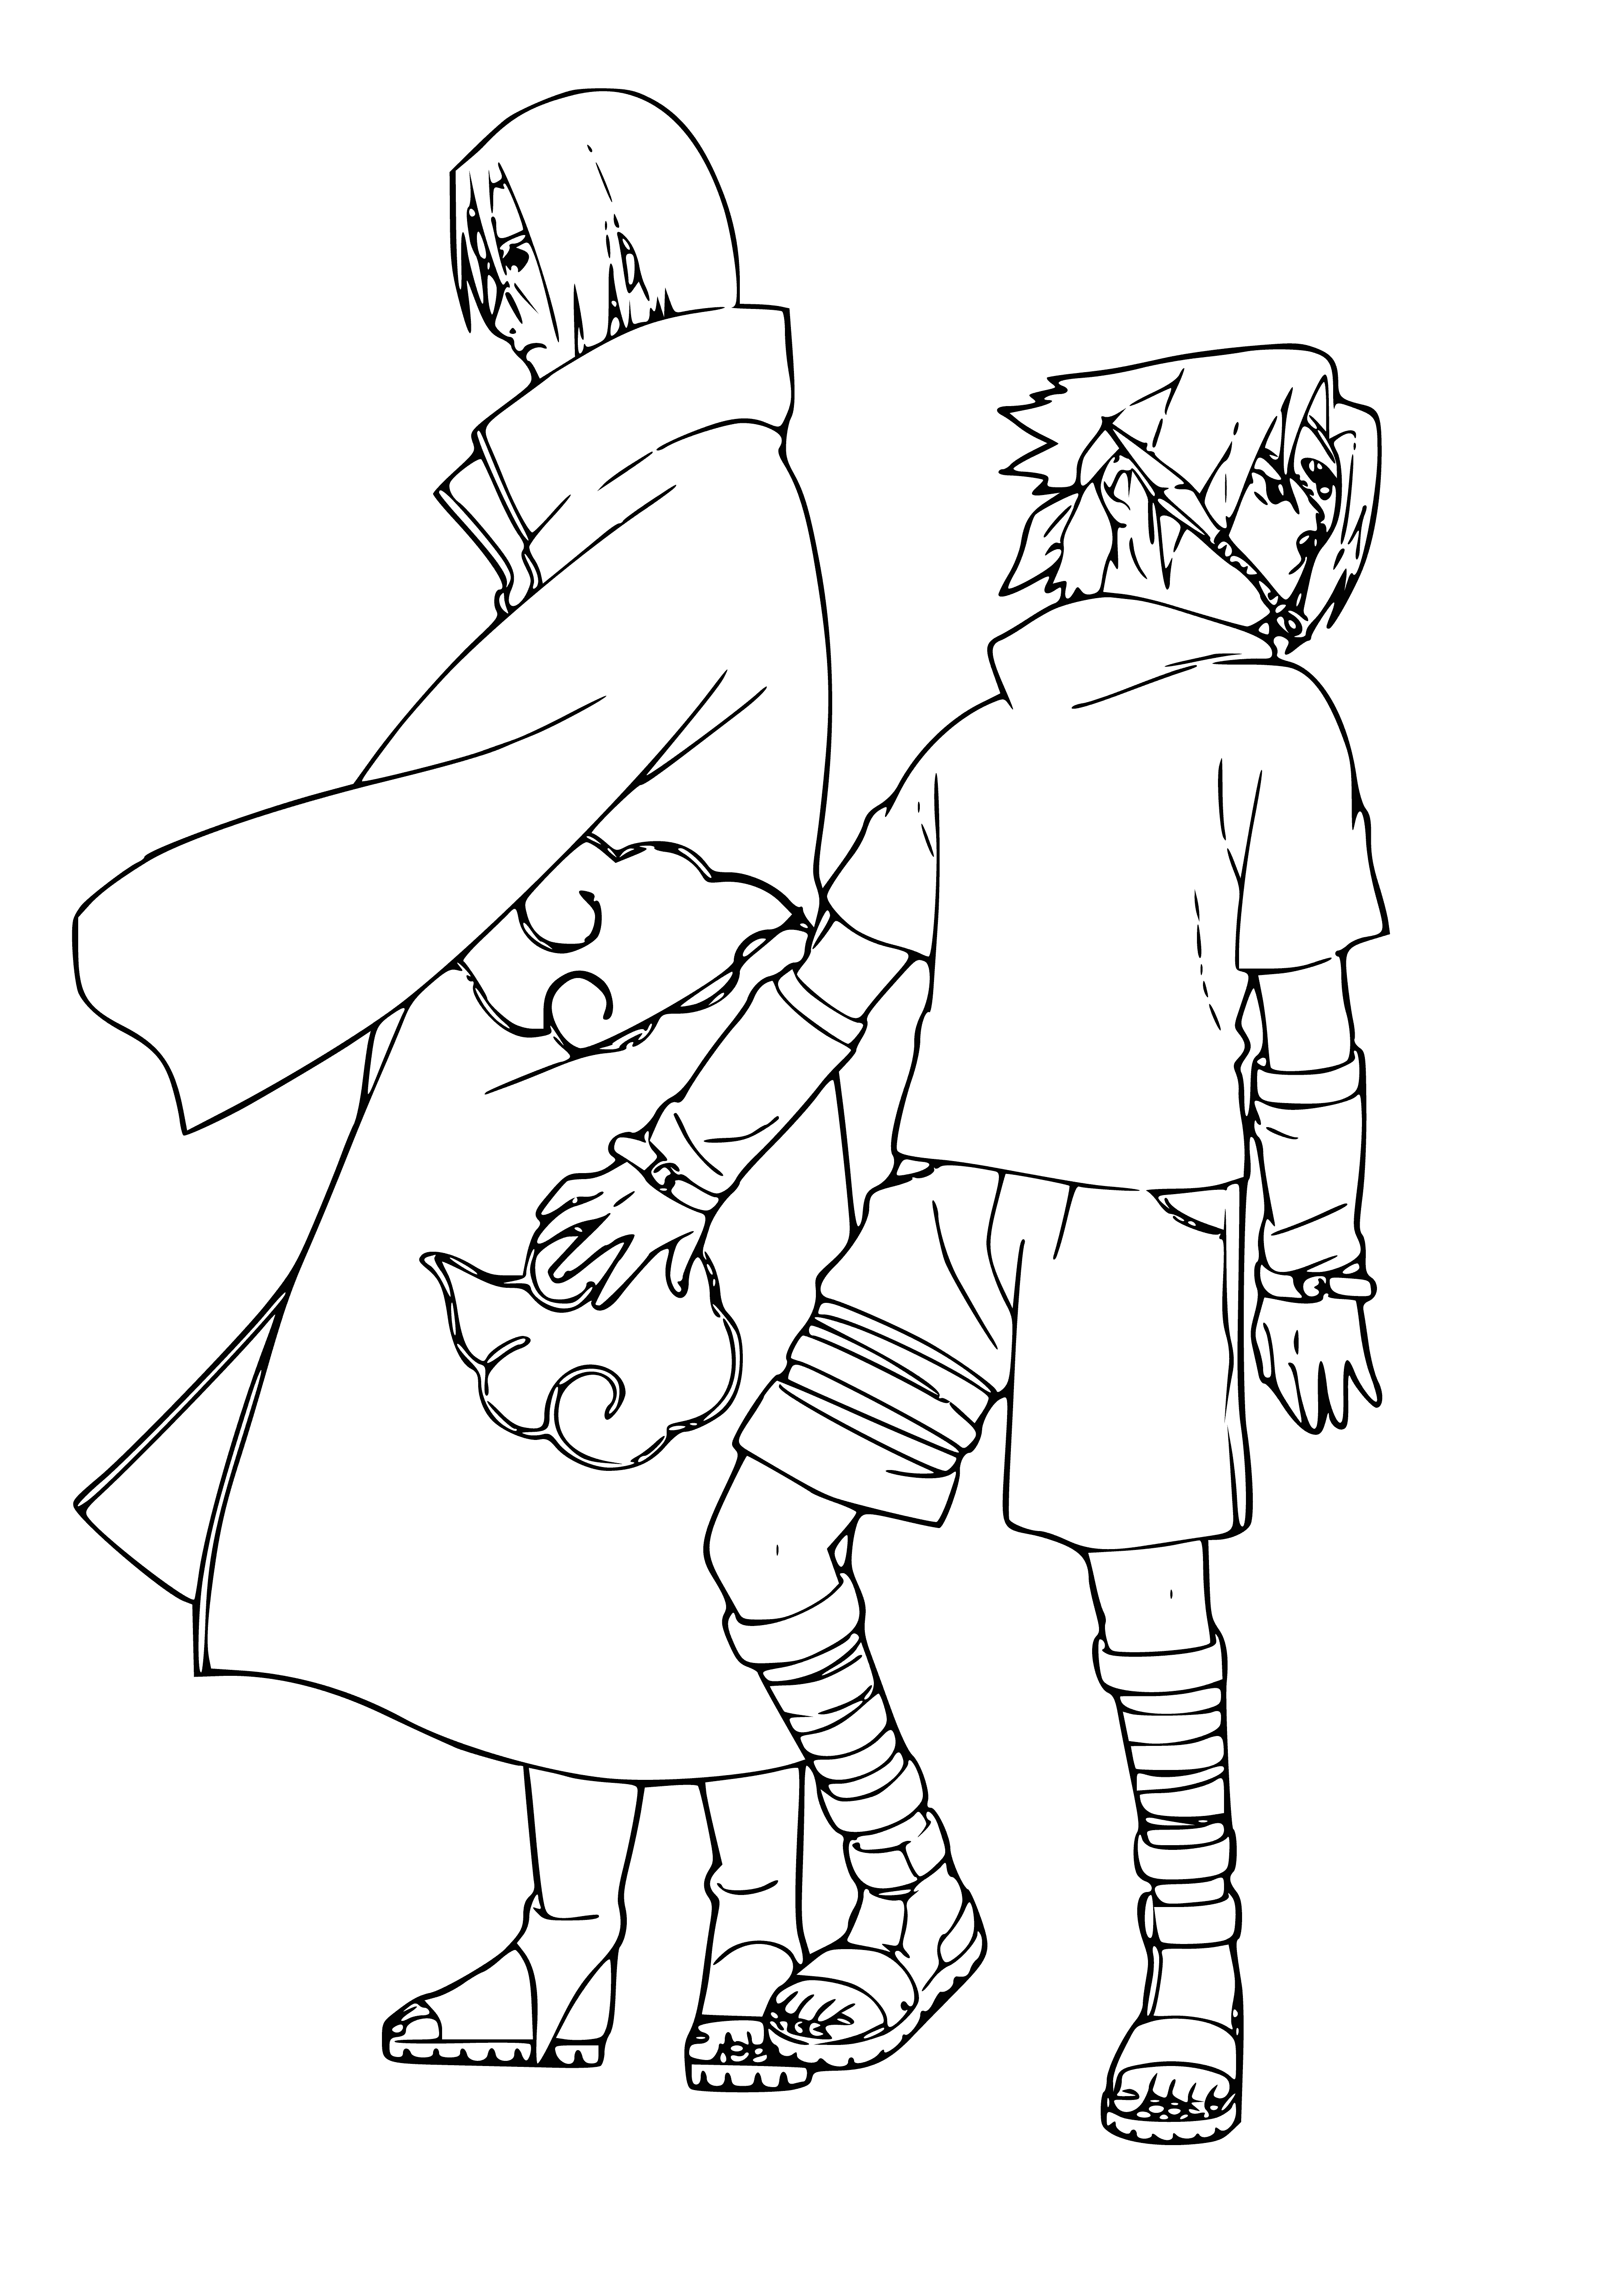 coloring page: Sasuke & Itachi surrounded by a giant black bird - Sasuke is angry and Itachi is calm.